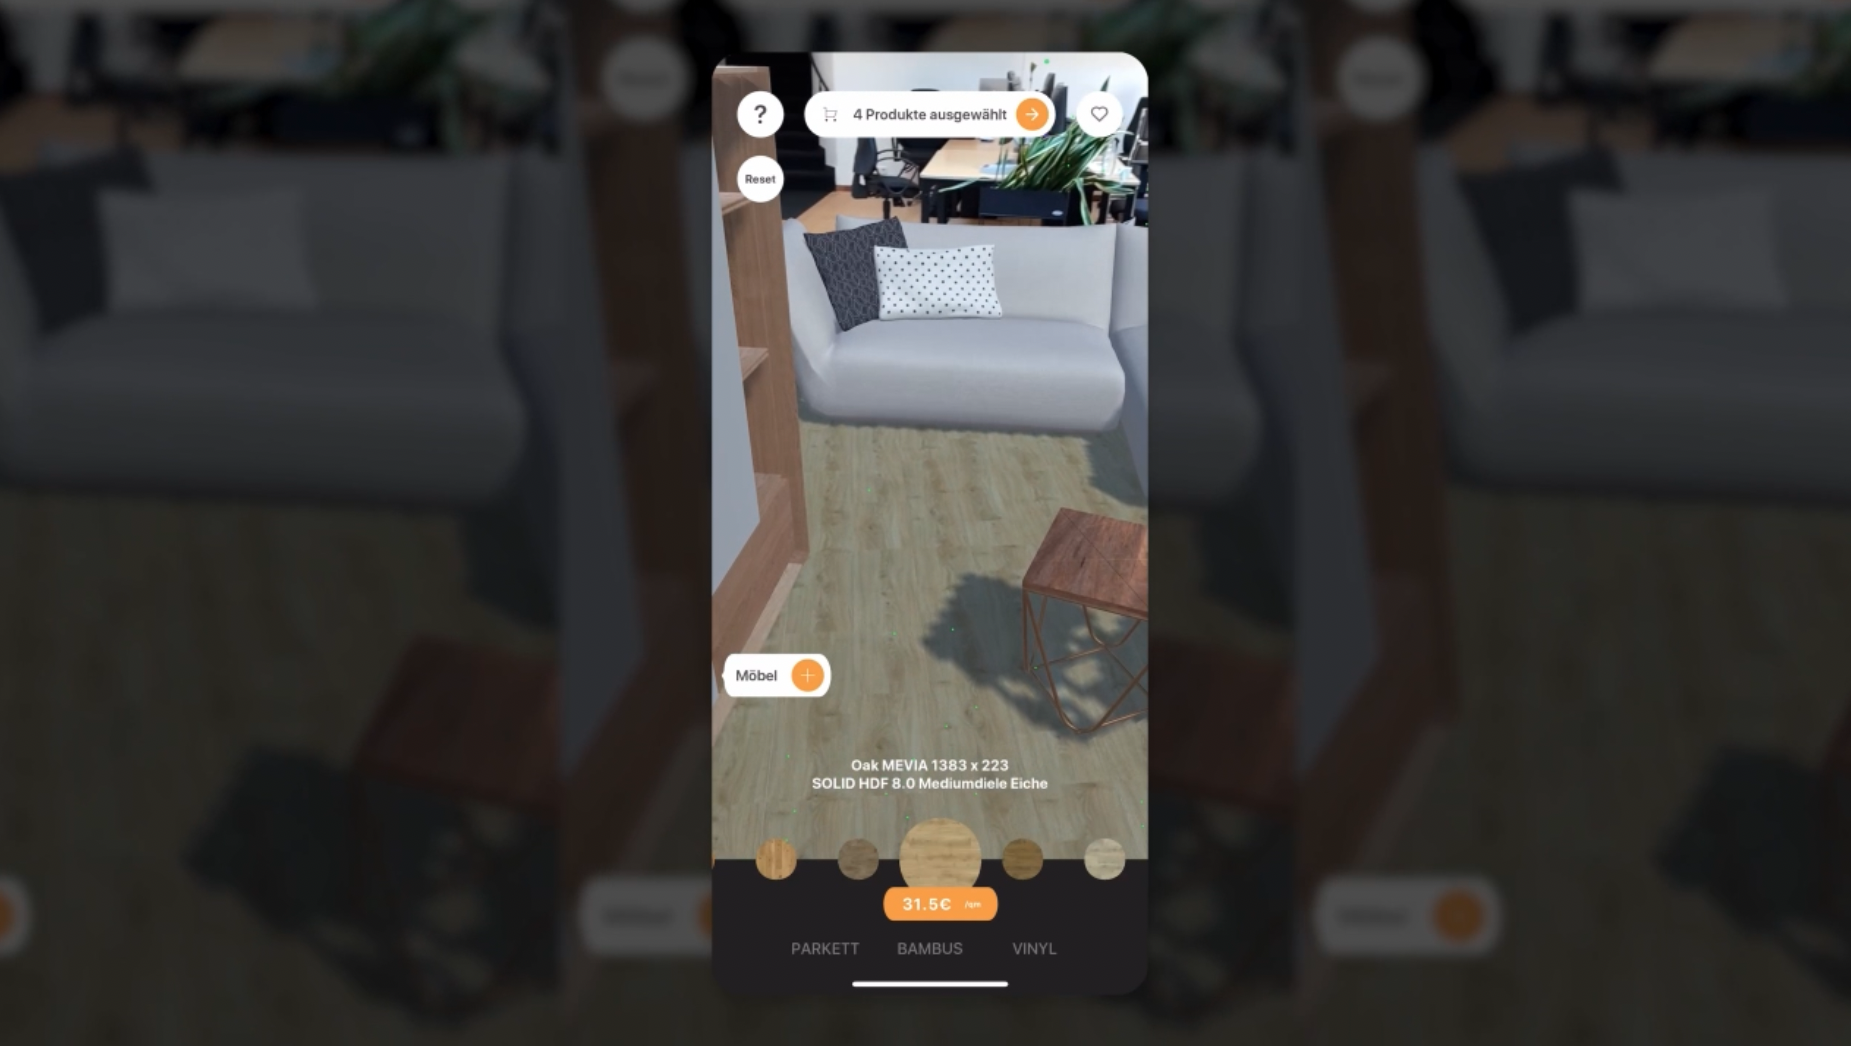 allaboutmyhouse augmented reality app &why